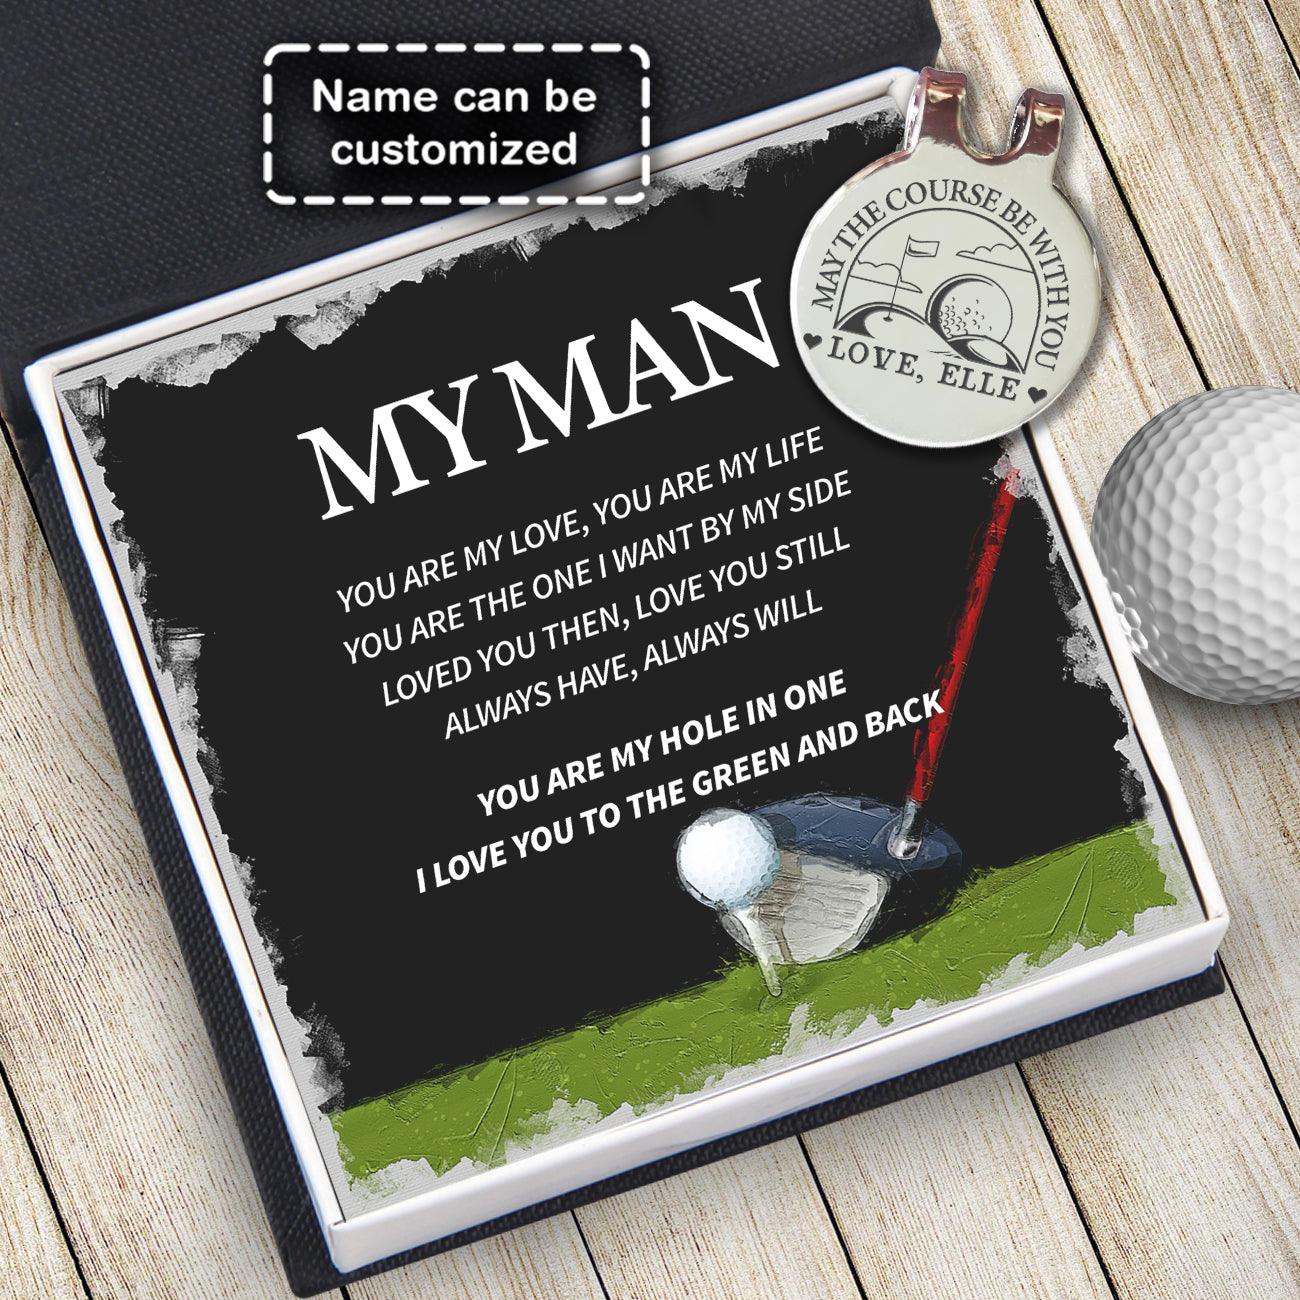 Personalised Golf Marker - Golf - To My Man - You Are My Love - Augata26006 - Gifts Holder